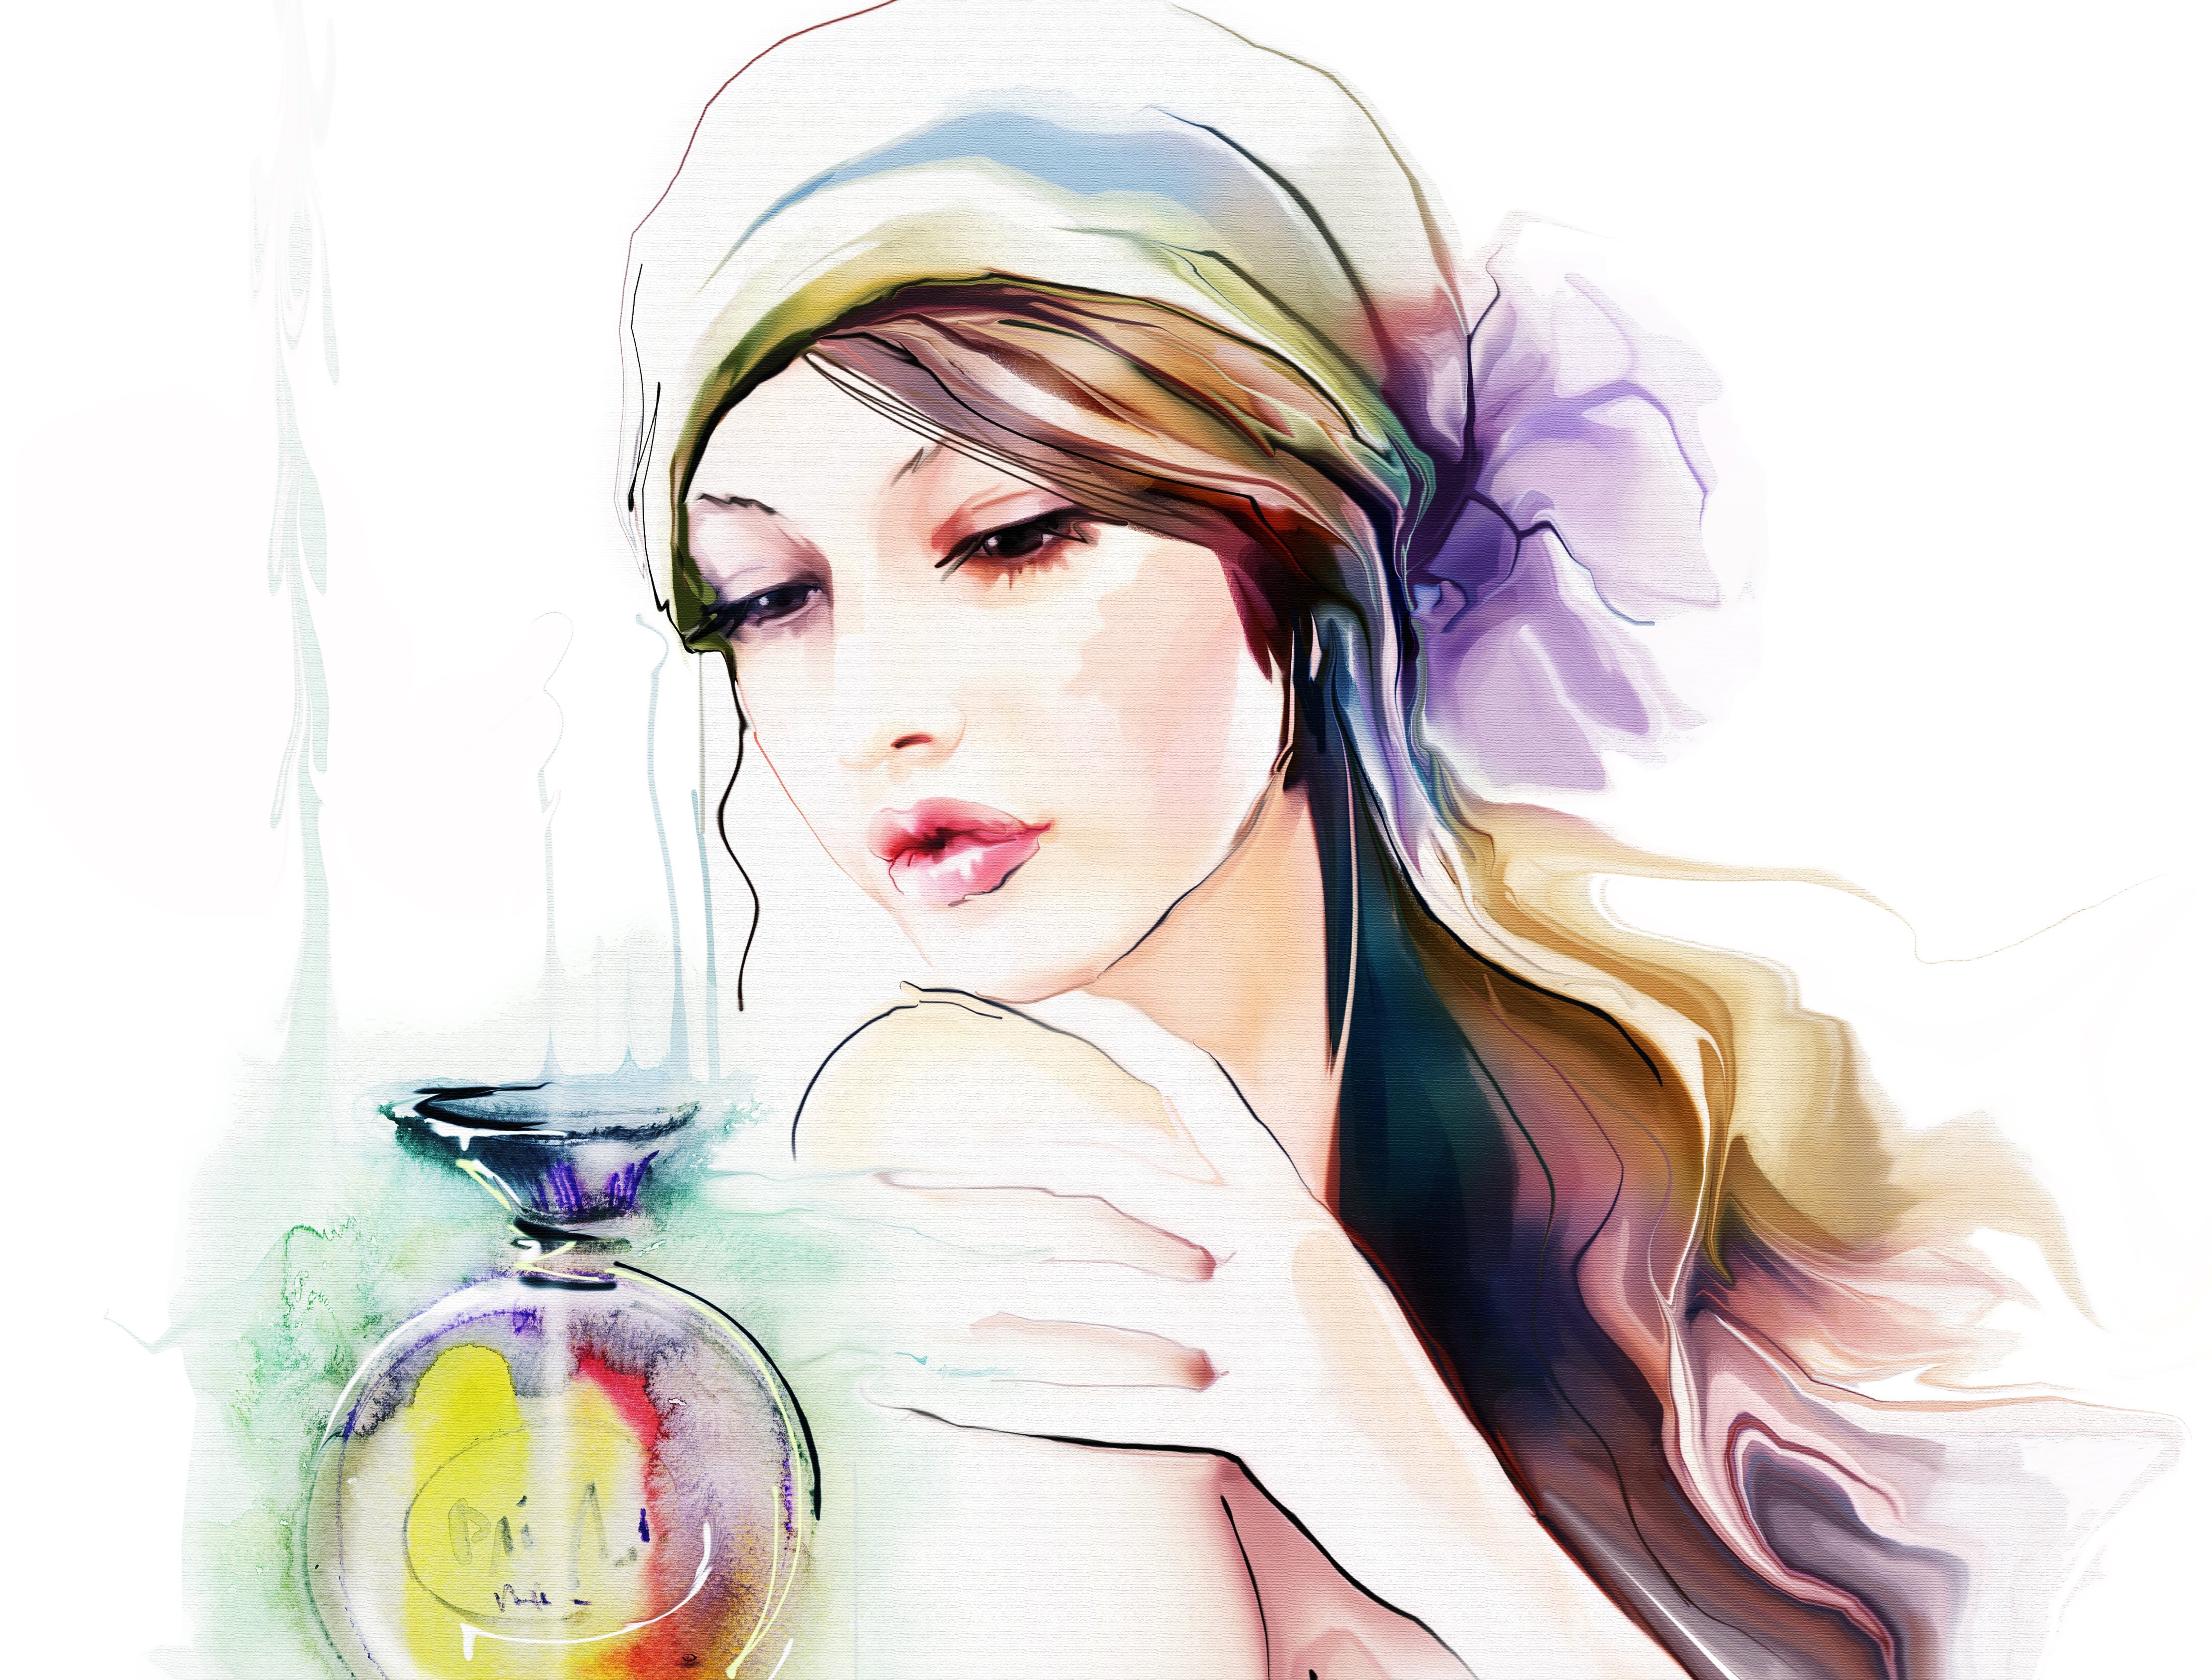 Artistic Painting Watercolor Woman Girl Scarf 4437x3370